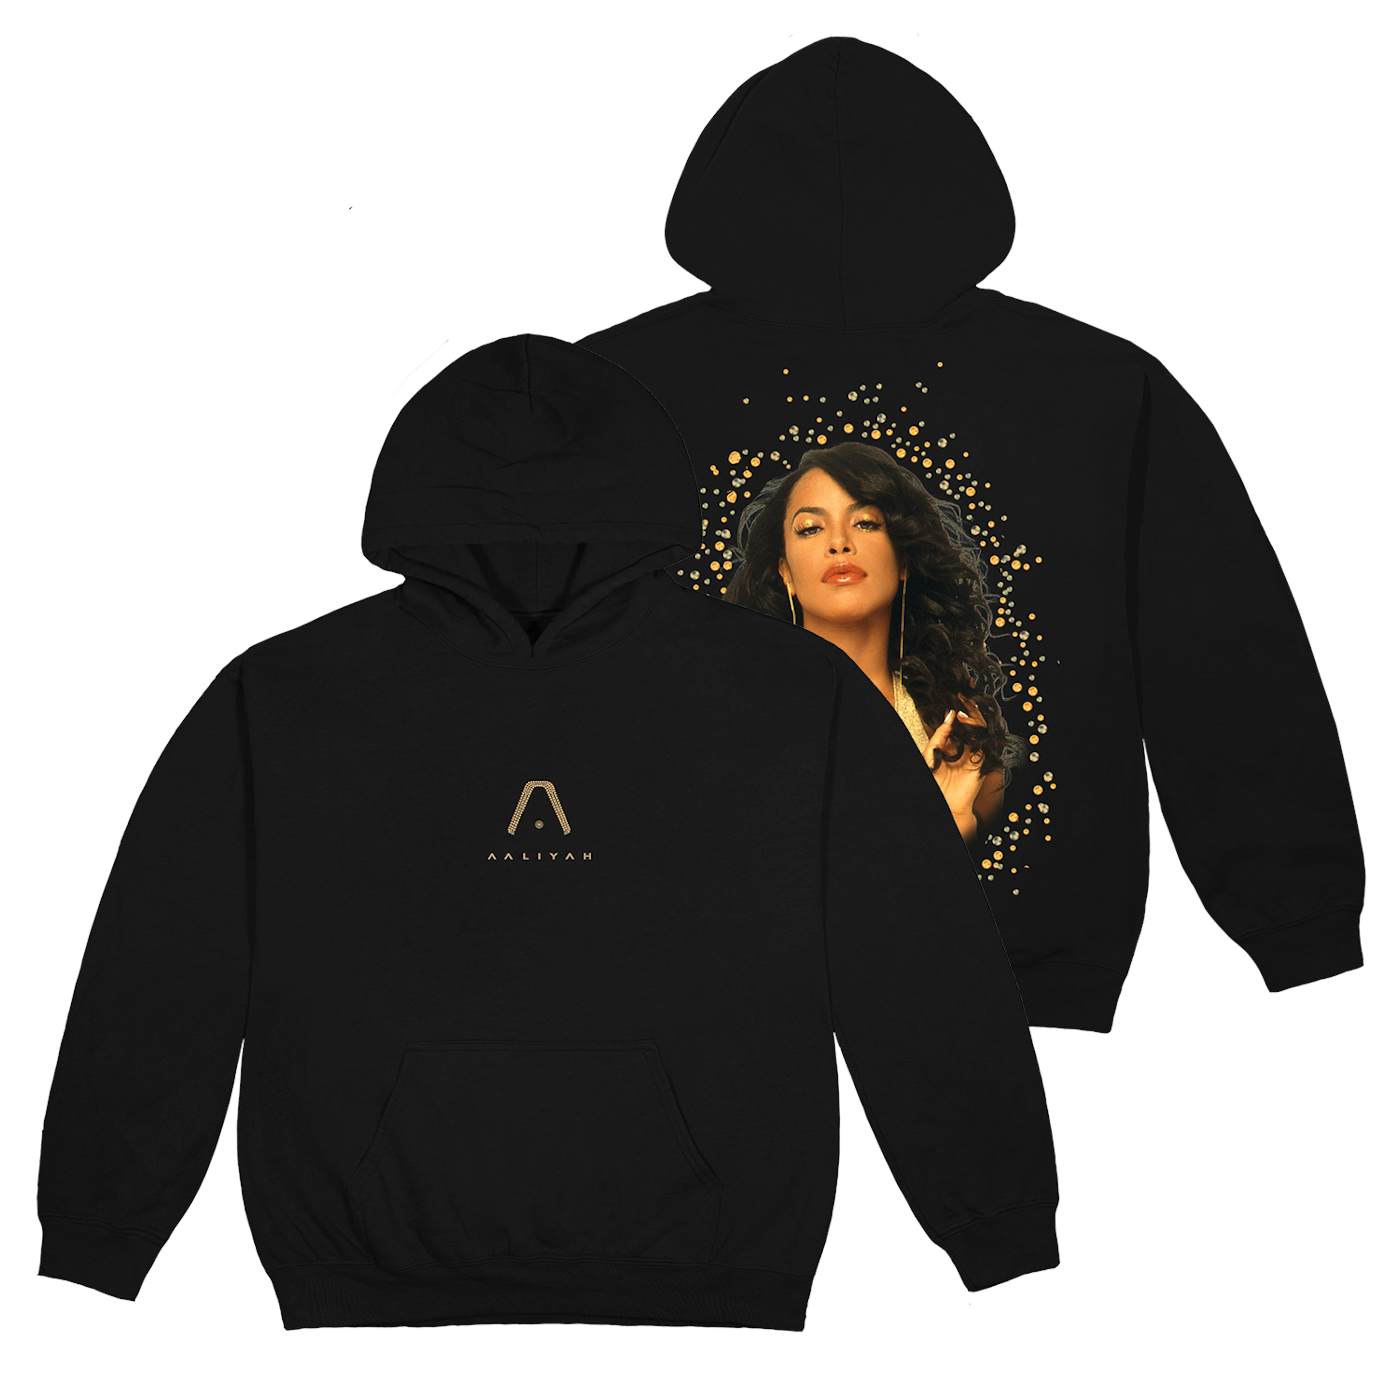 Aaliyah Brick Layers Hoodie! Available Now! Shopallstarsports.com